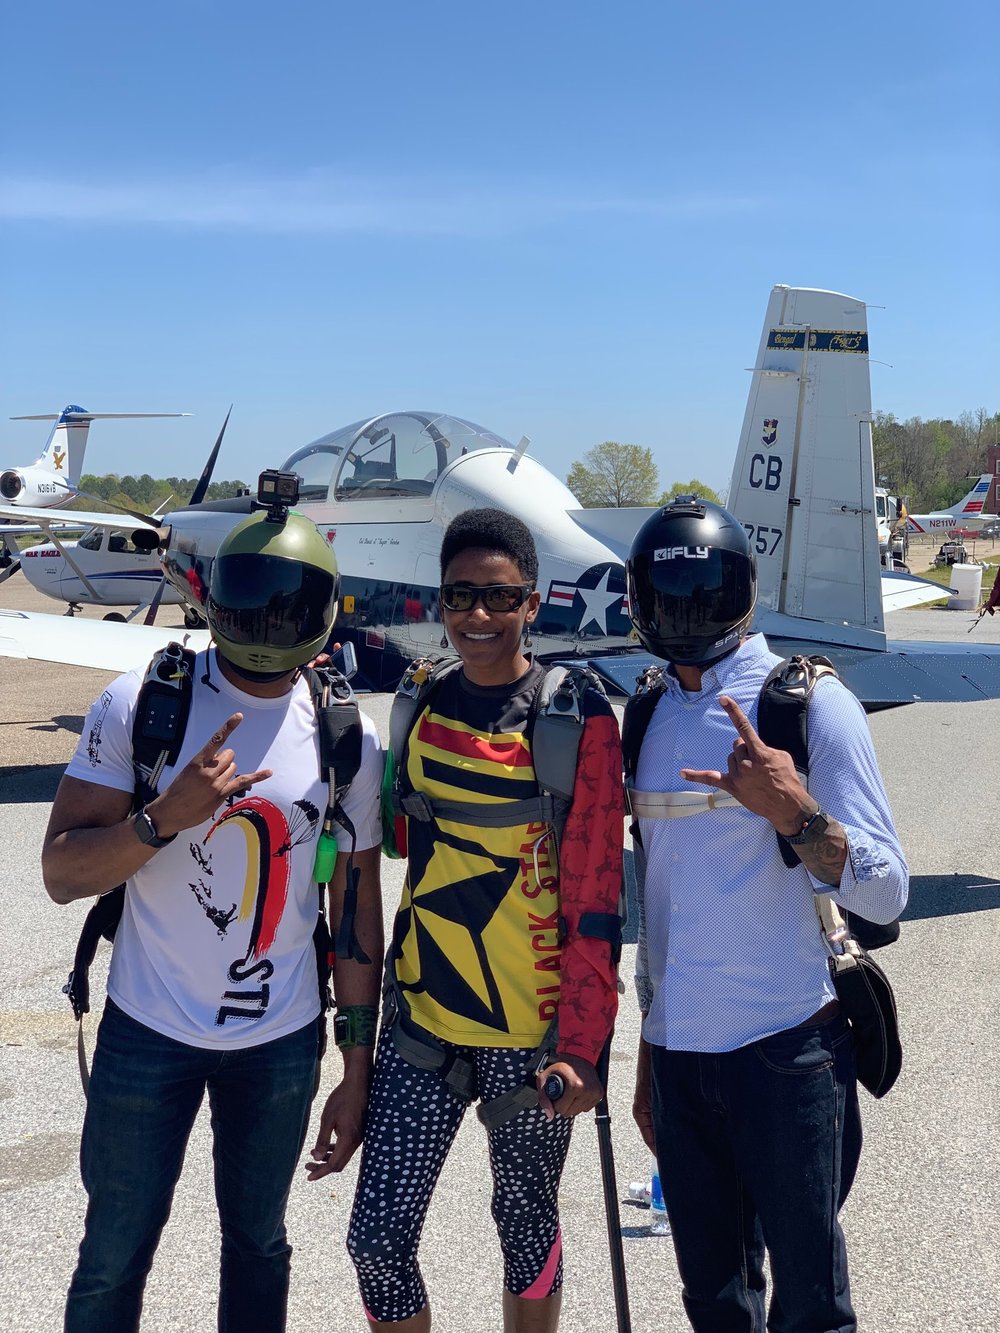  Emanuel Brice, Danielle Williams and Waz Choudhry joined LFA volunteers at Moton Field, Tuskegee, AL on March 30, 2019.  